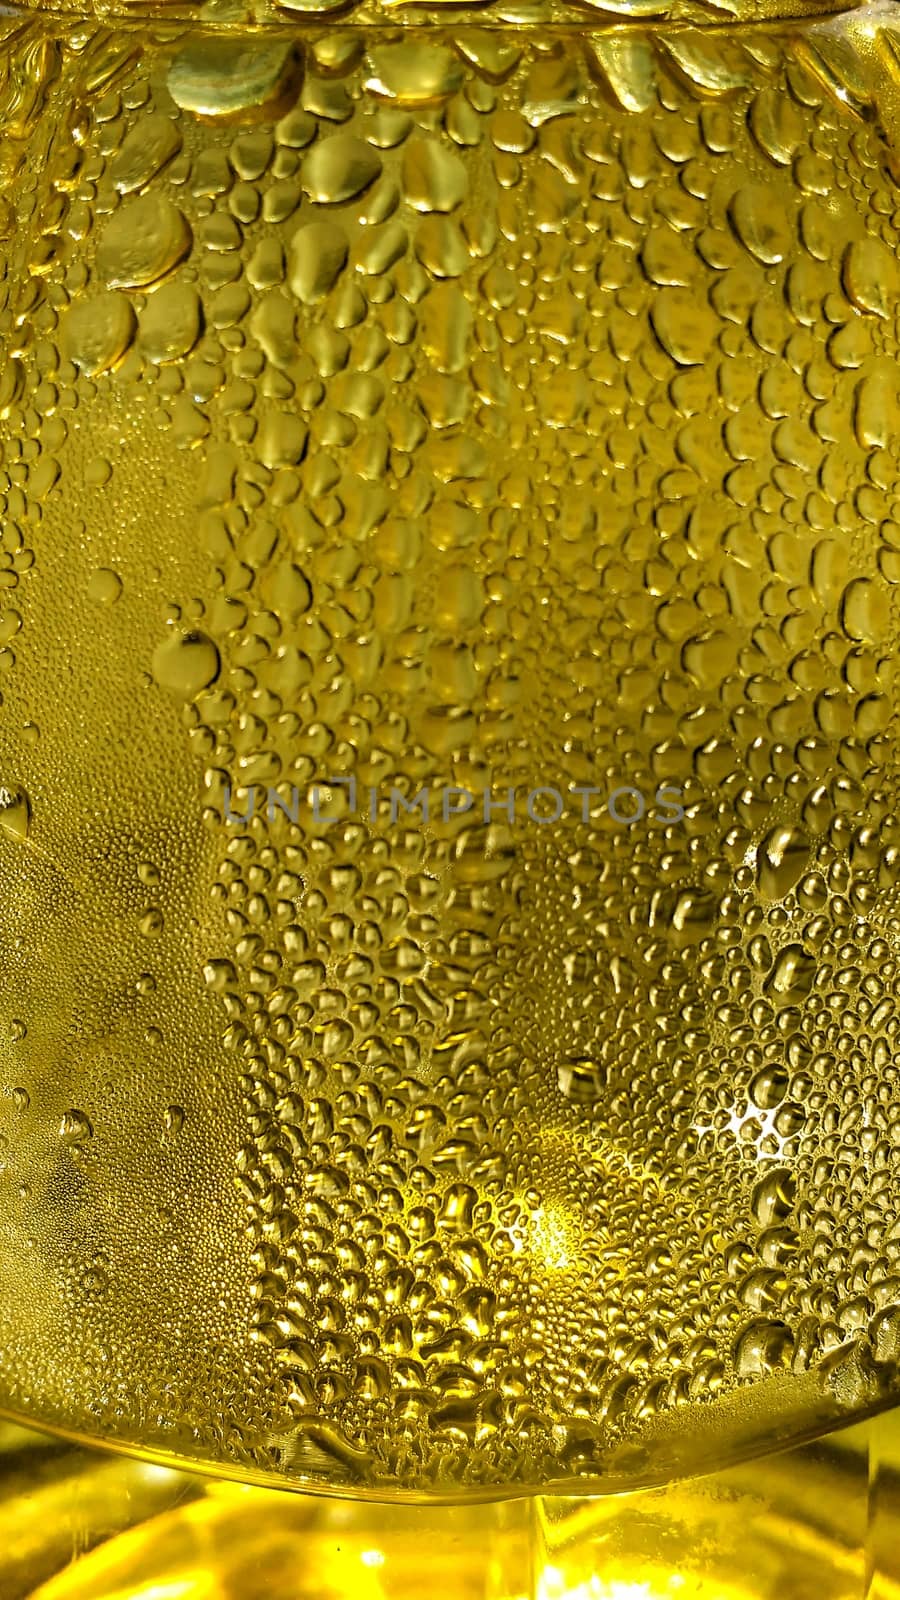 Colorful texture of evaporated water in a yellow vaporizer